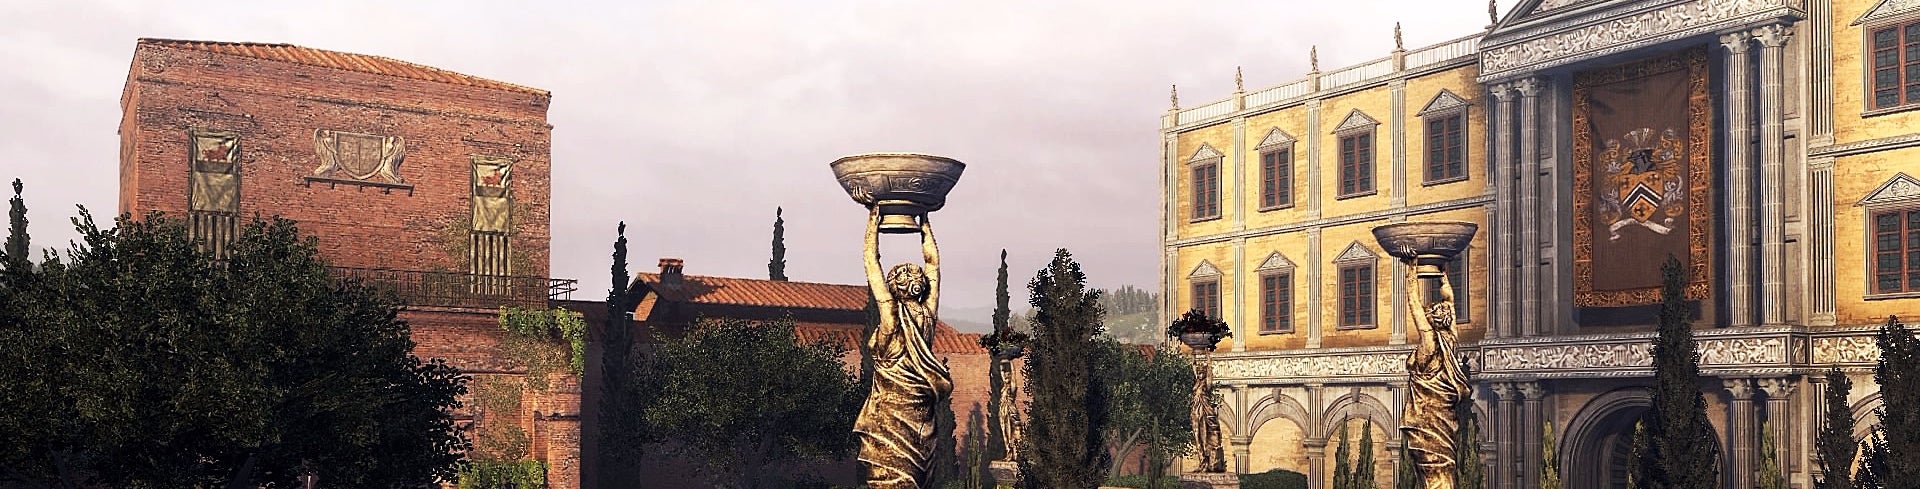 Image for There's more to Assassin's Creed's Renaissance Italy than meets the eye